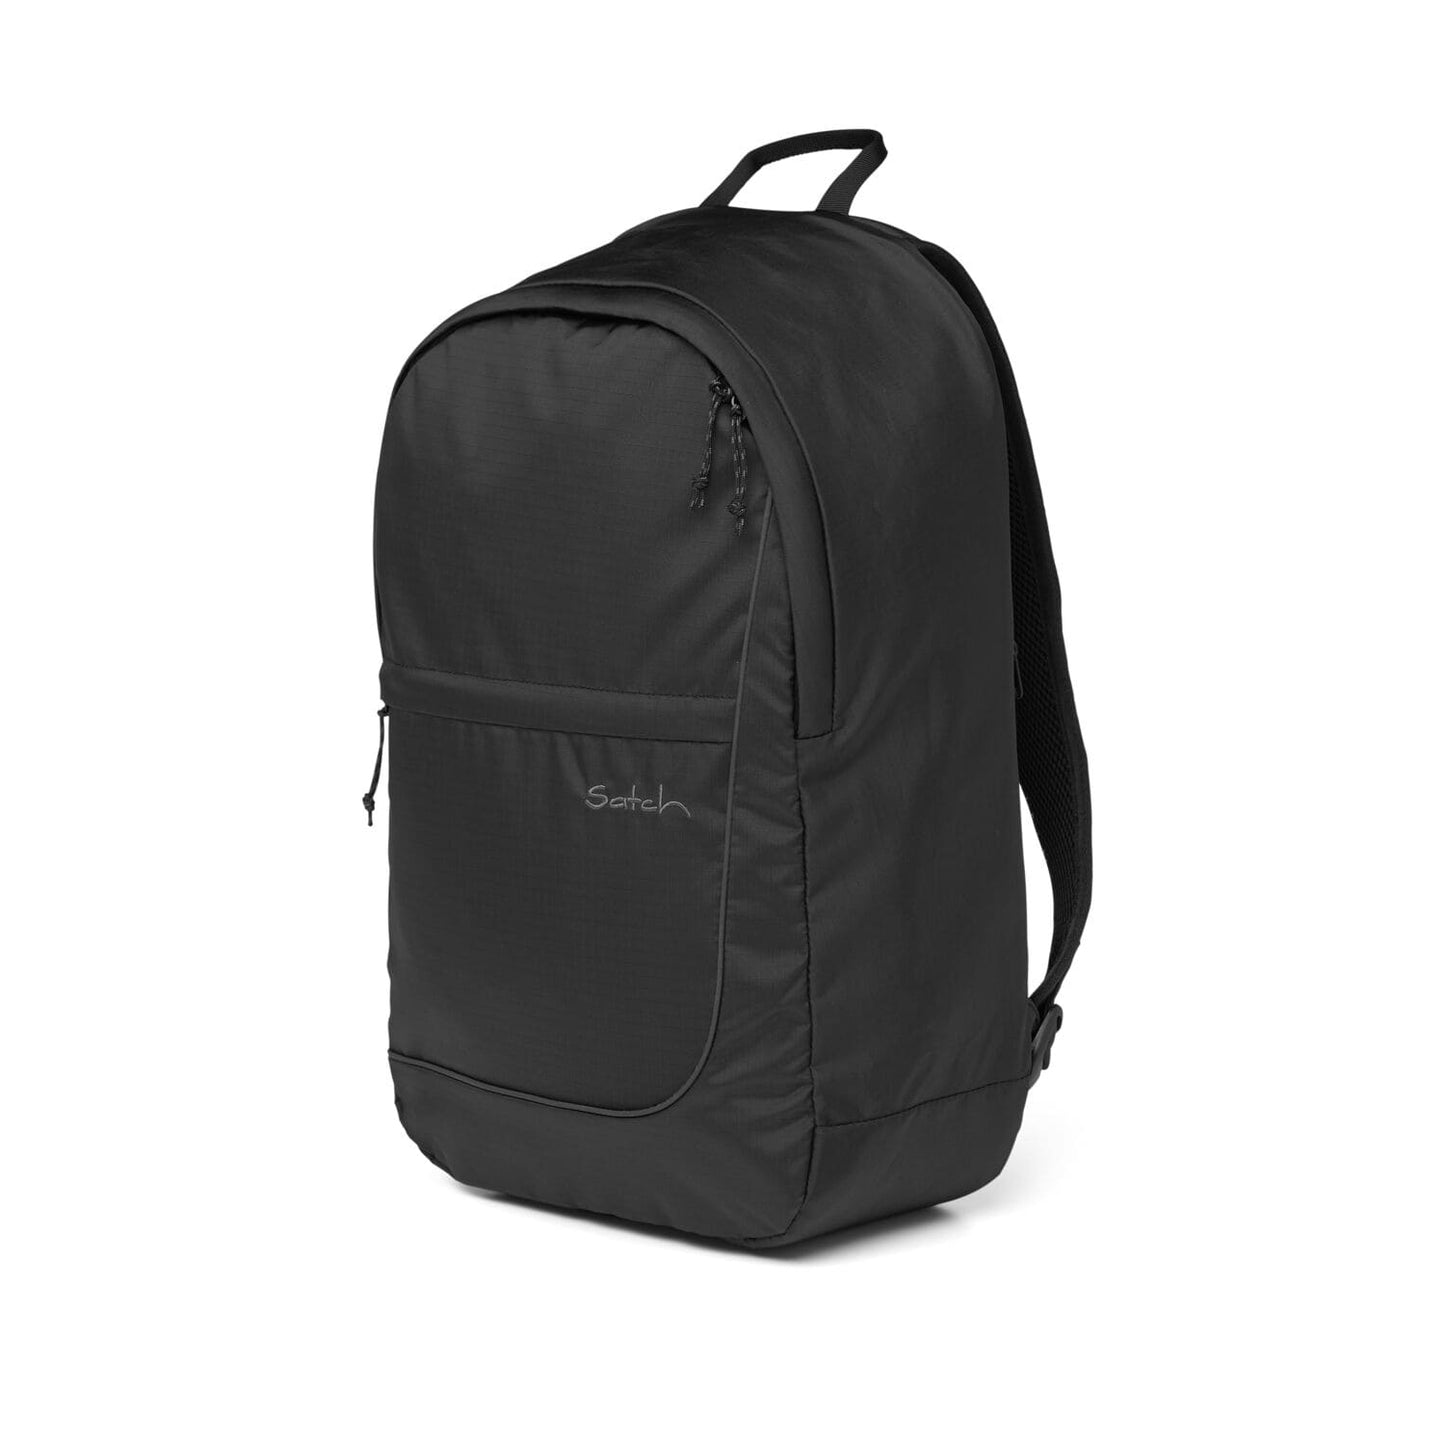 Daypack FLY Ripstop Black